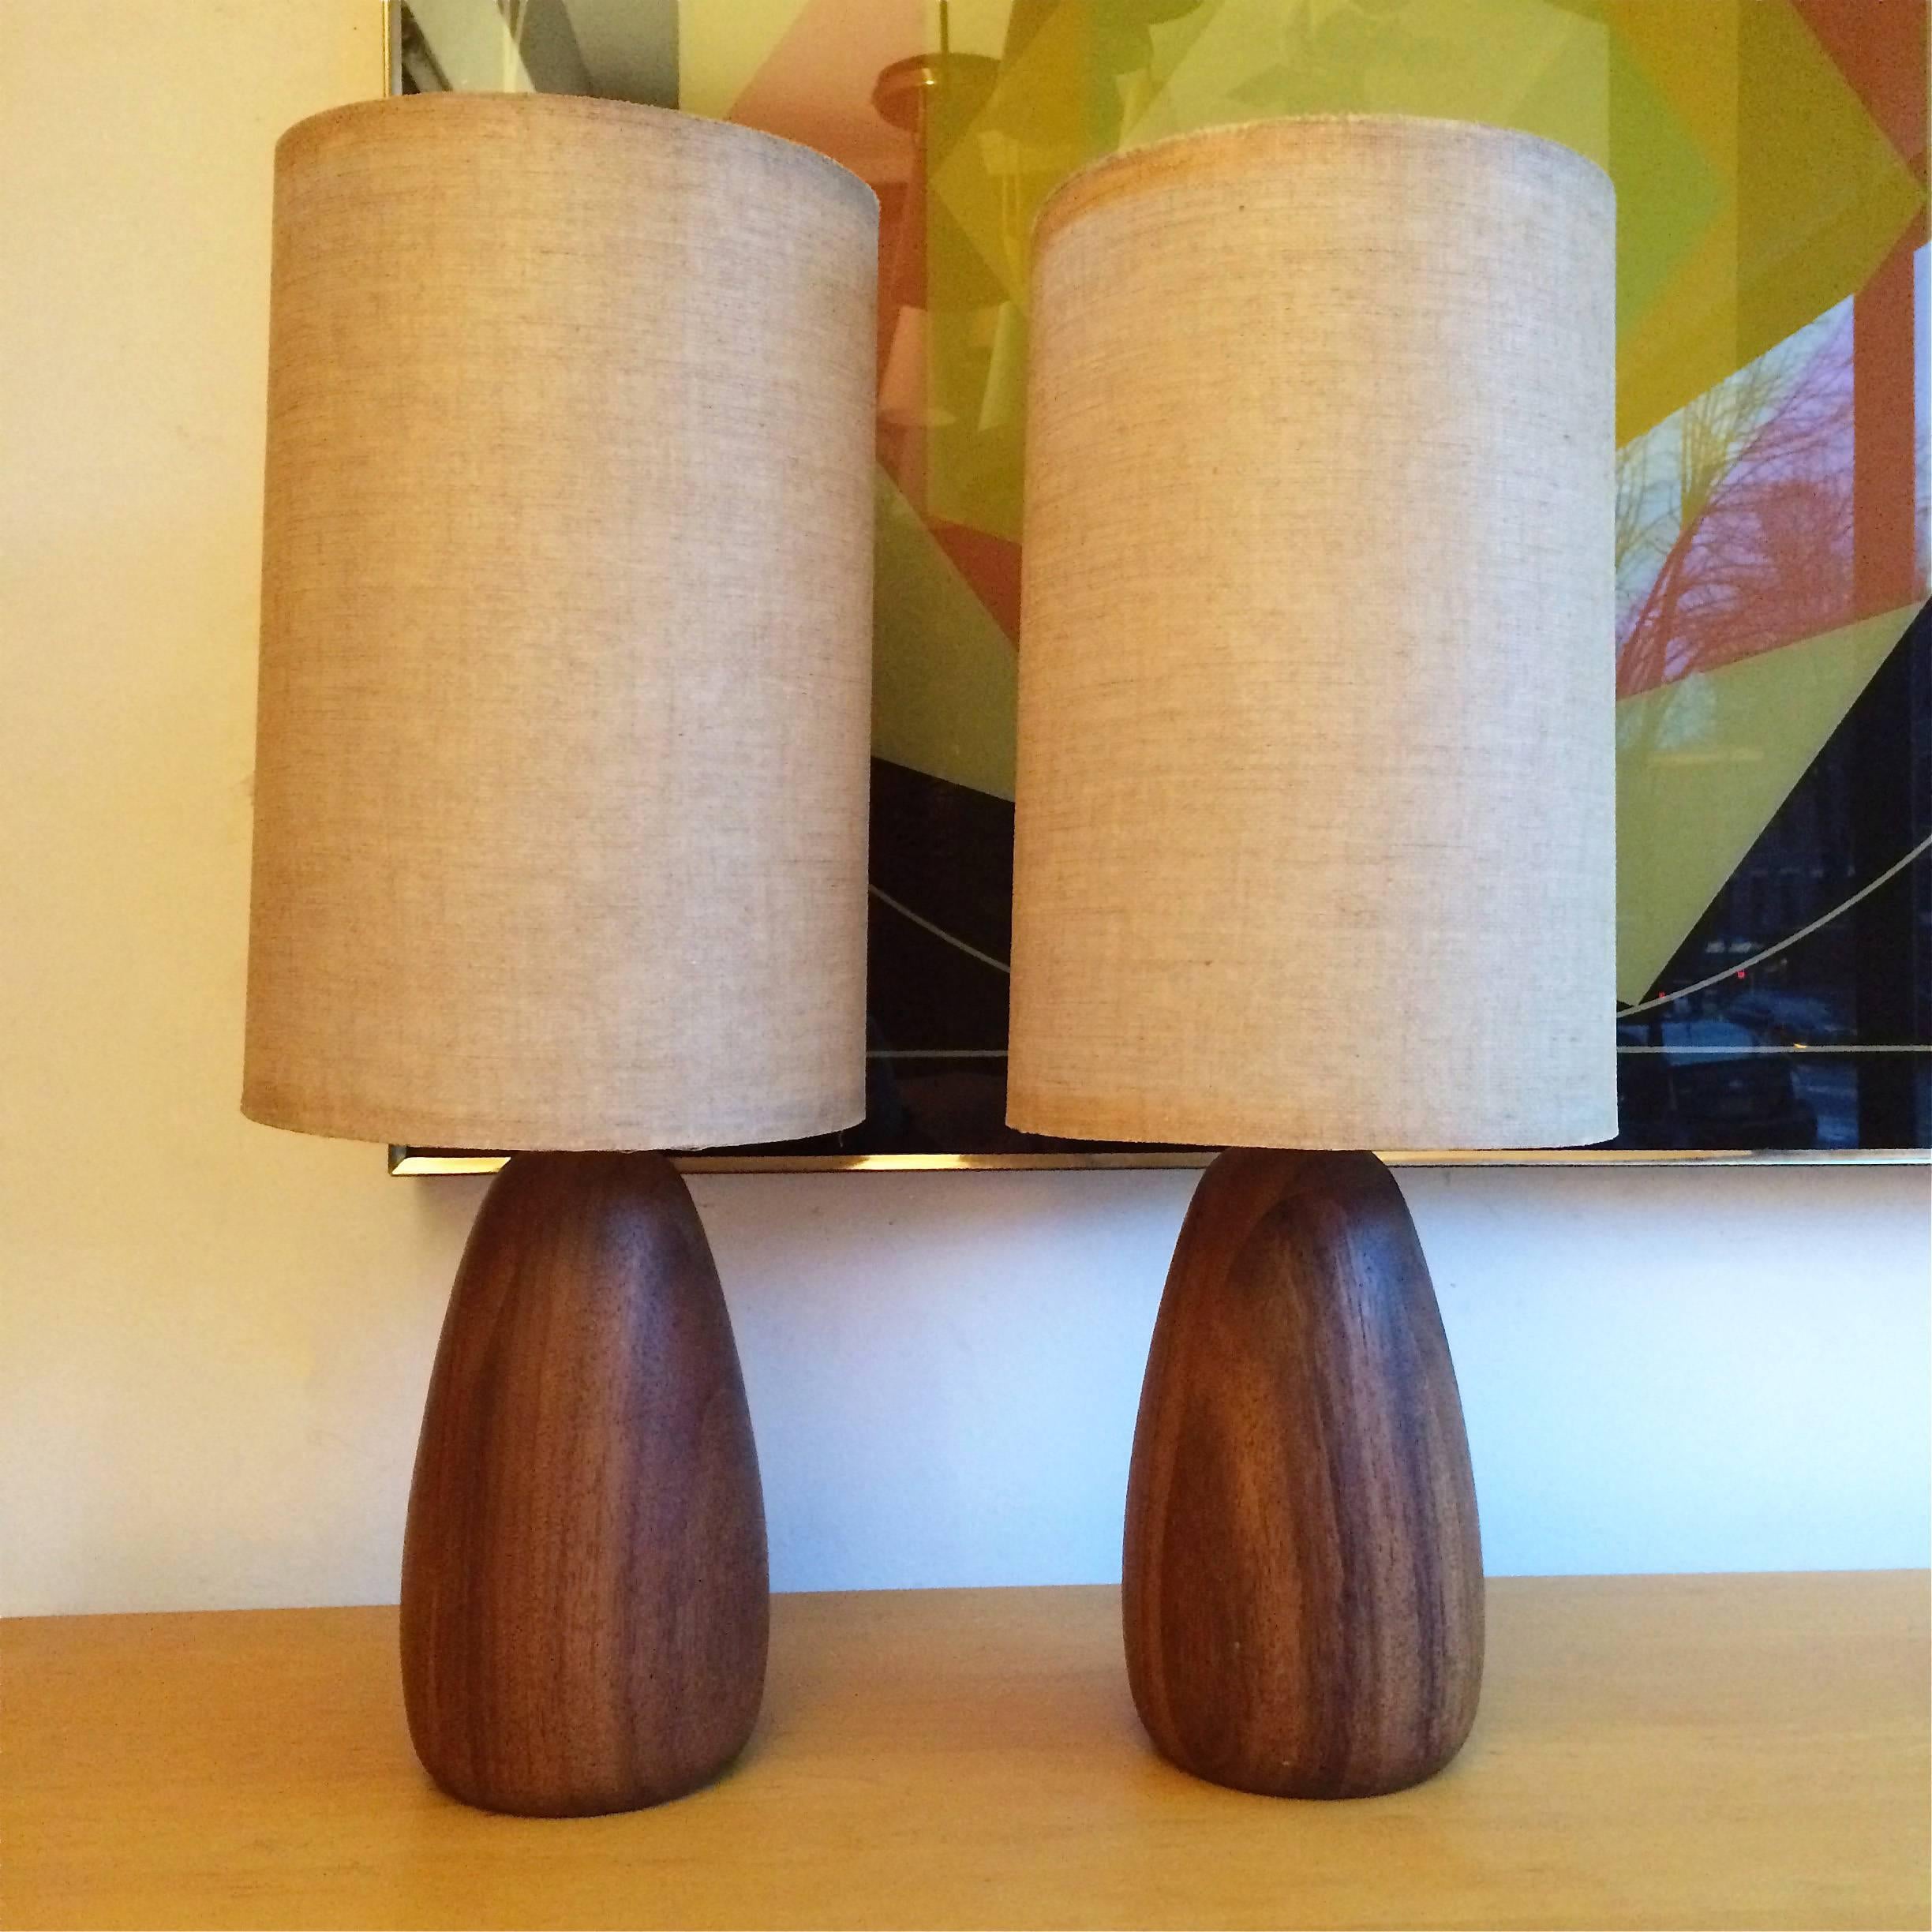 Pair of petite, Mid-Century Modern, table tables with acorn shape, walnut bases, brass necks and original grasscloth shades.

Measures: 5" diameter x 22" overall height, walnut base is 9" height.